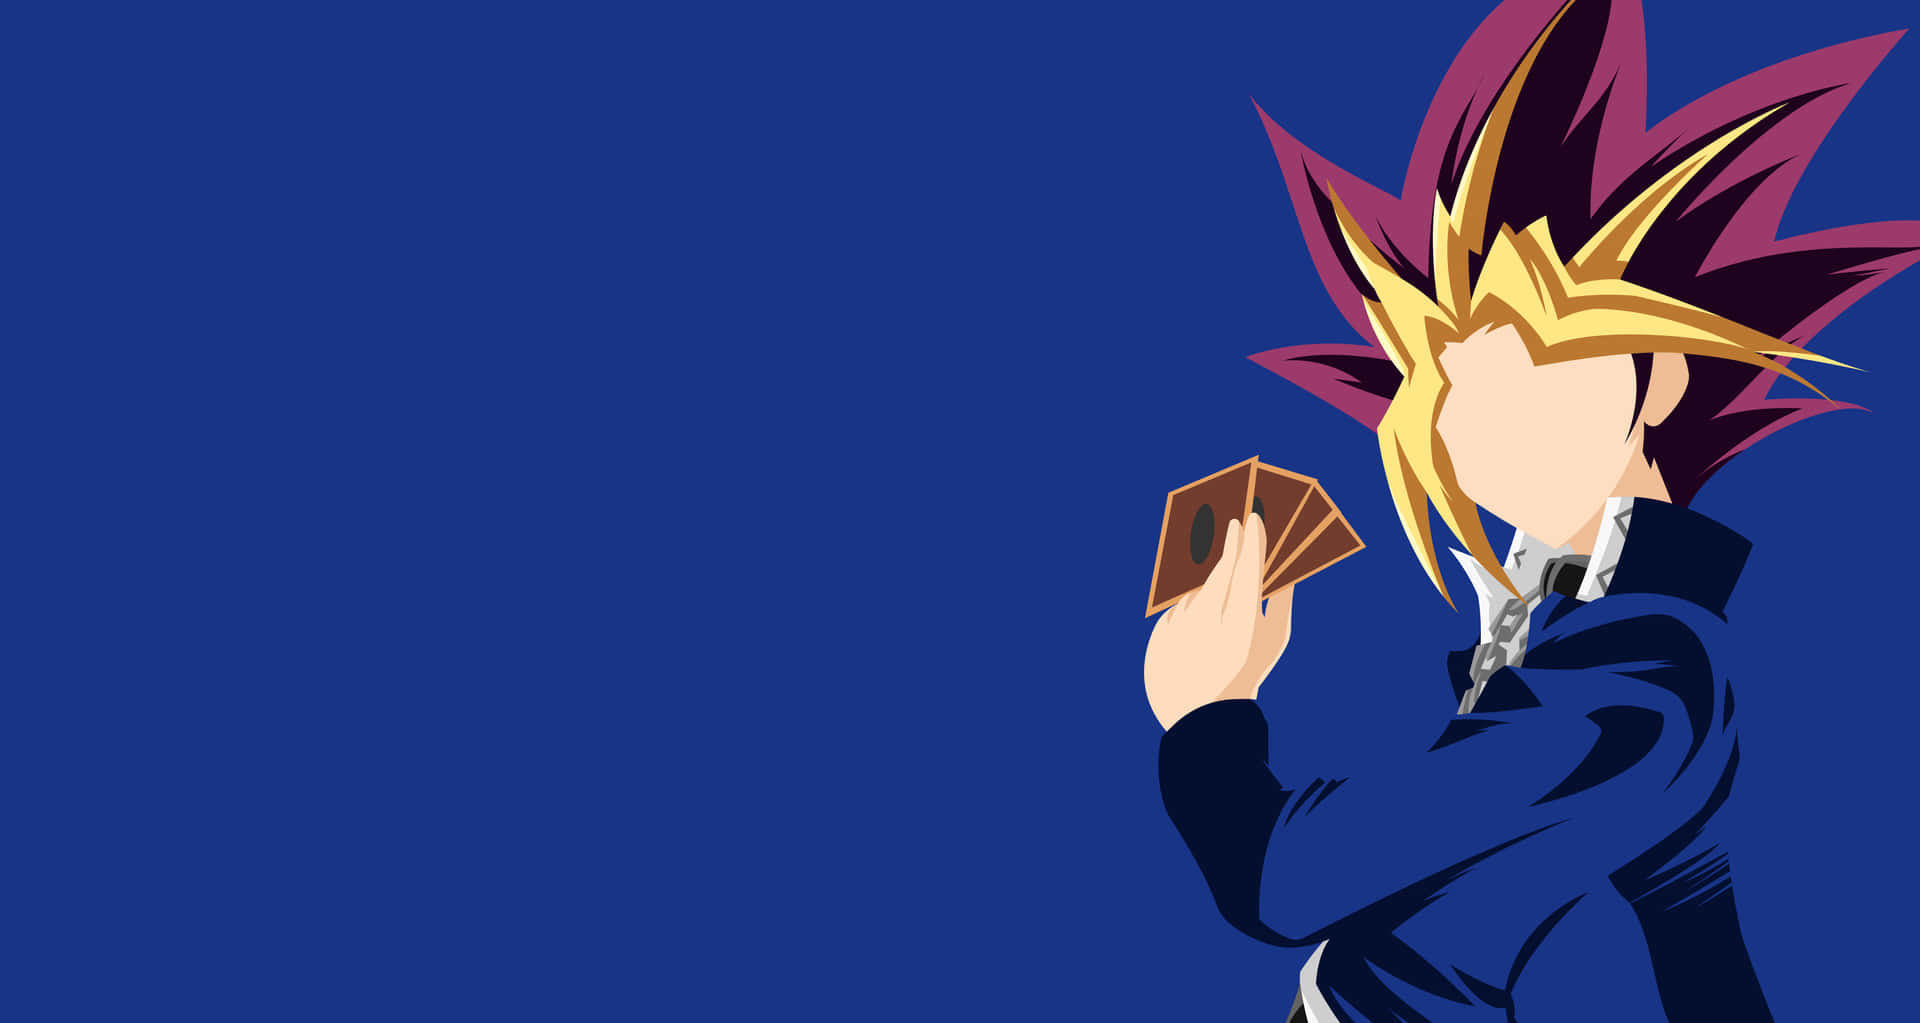 Yugi Muto, the King of Games, standing strong and confident Wallpaper